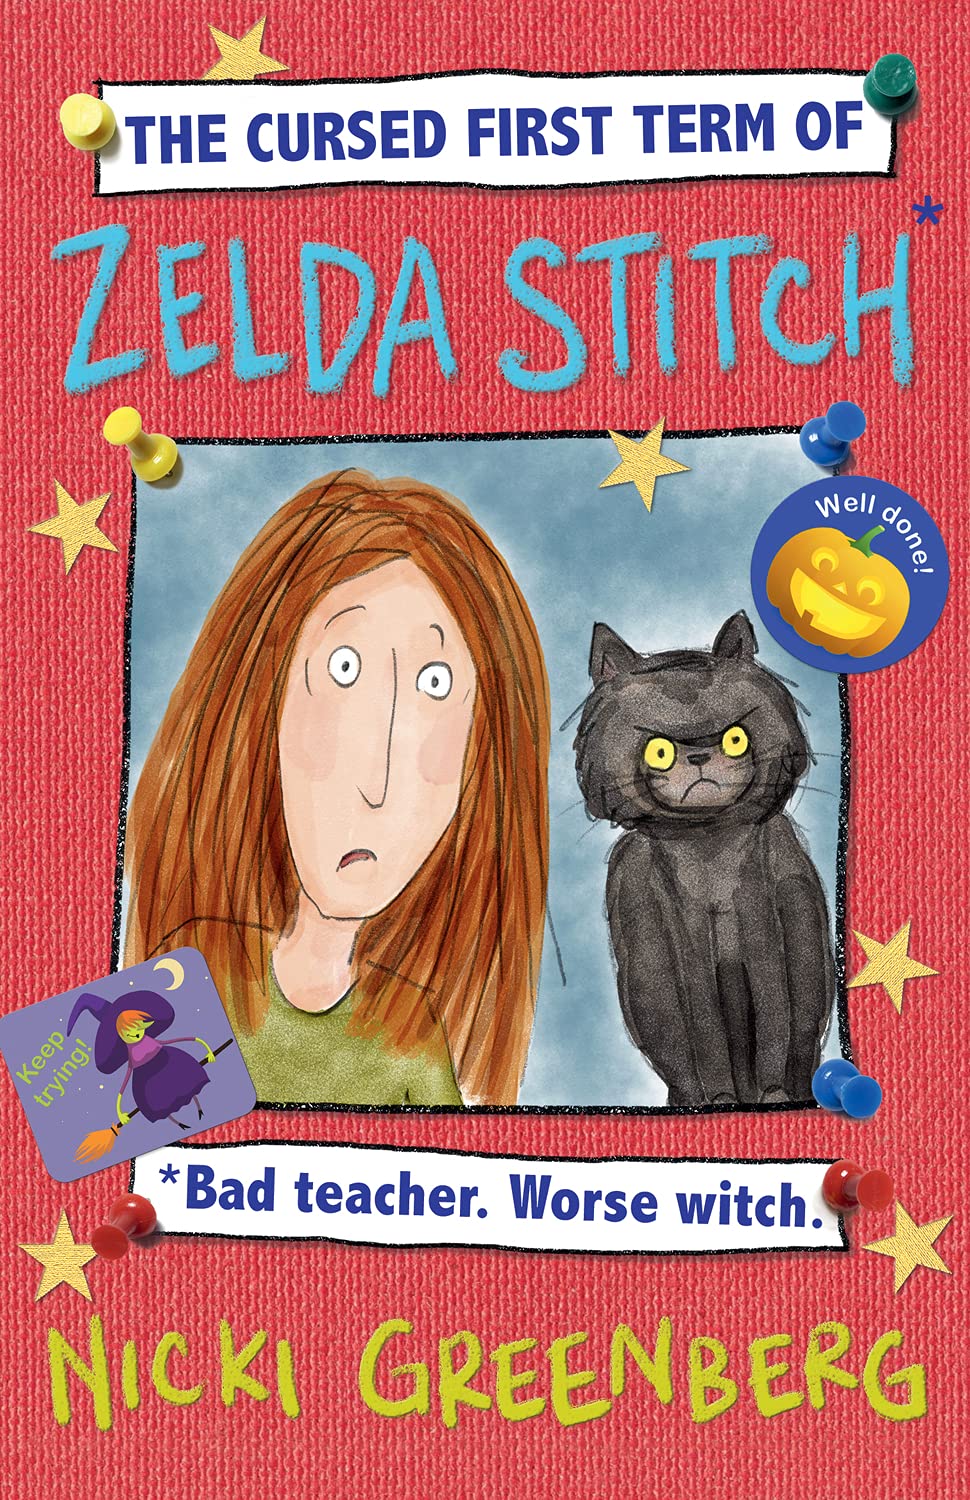 The Cursed First Term of Zelda Stitch. Bad Teacher. Worse Witch. by Nicki Greenberg at Chapters online bookstore Pakistan